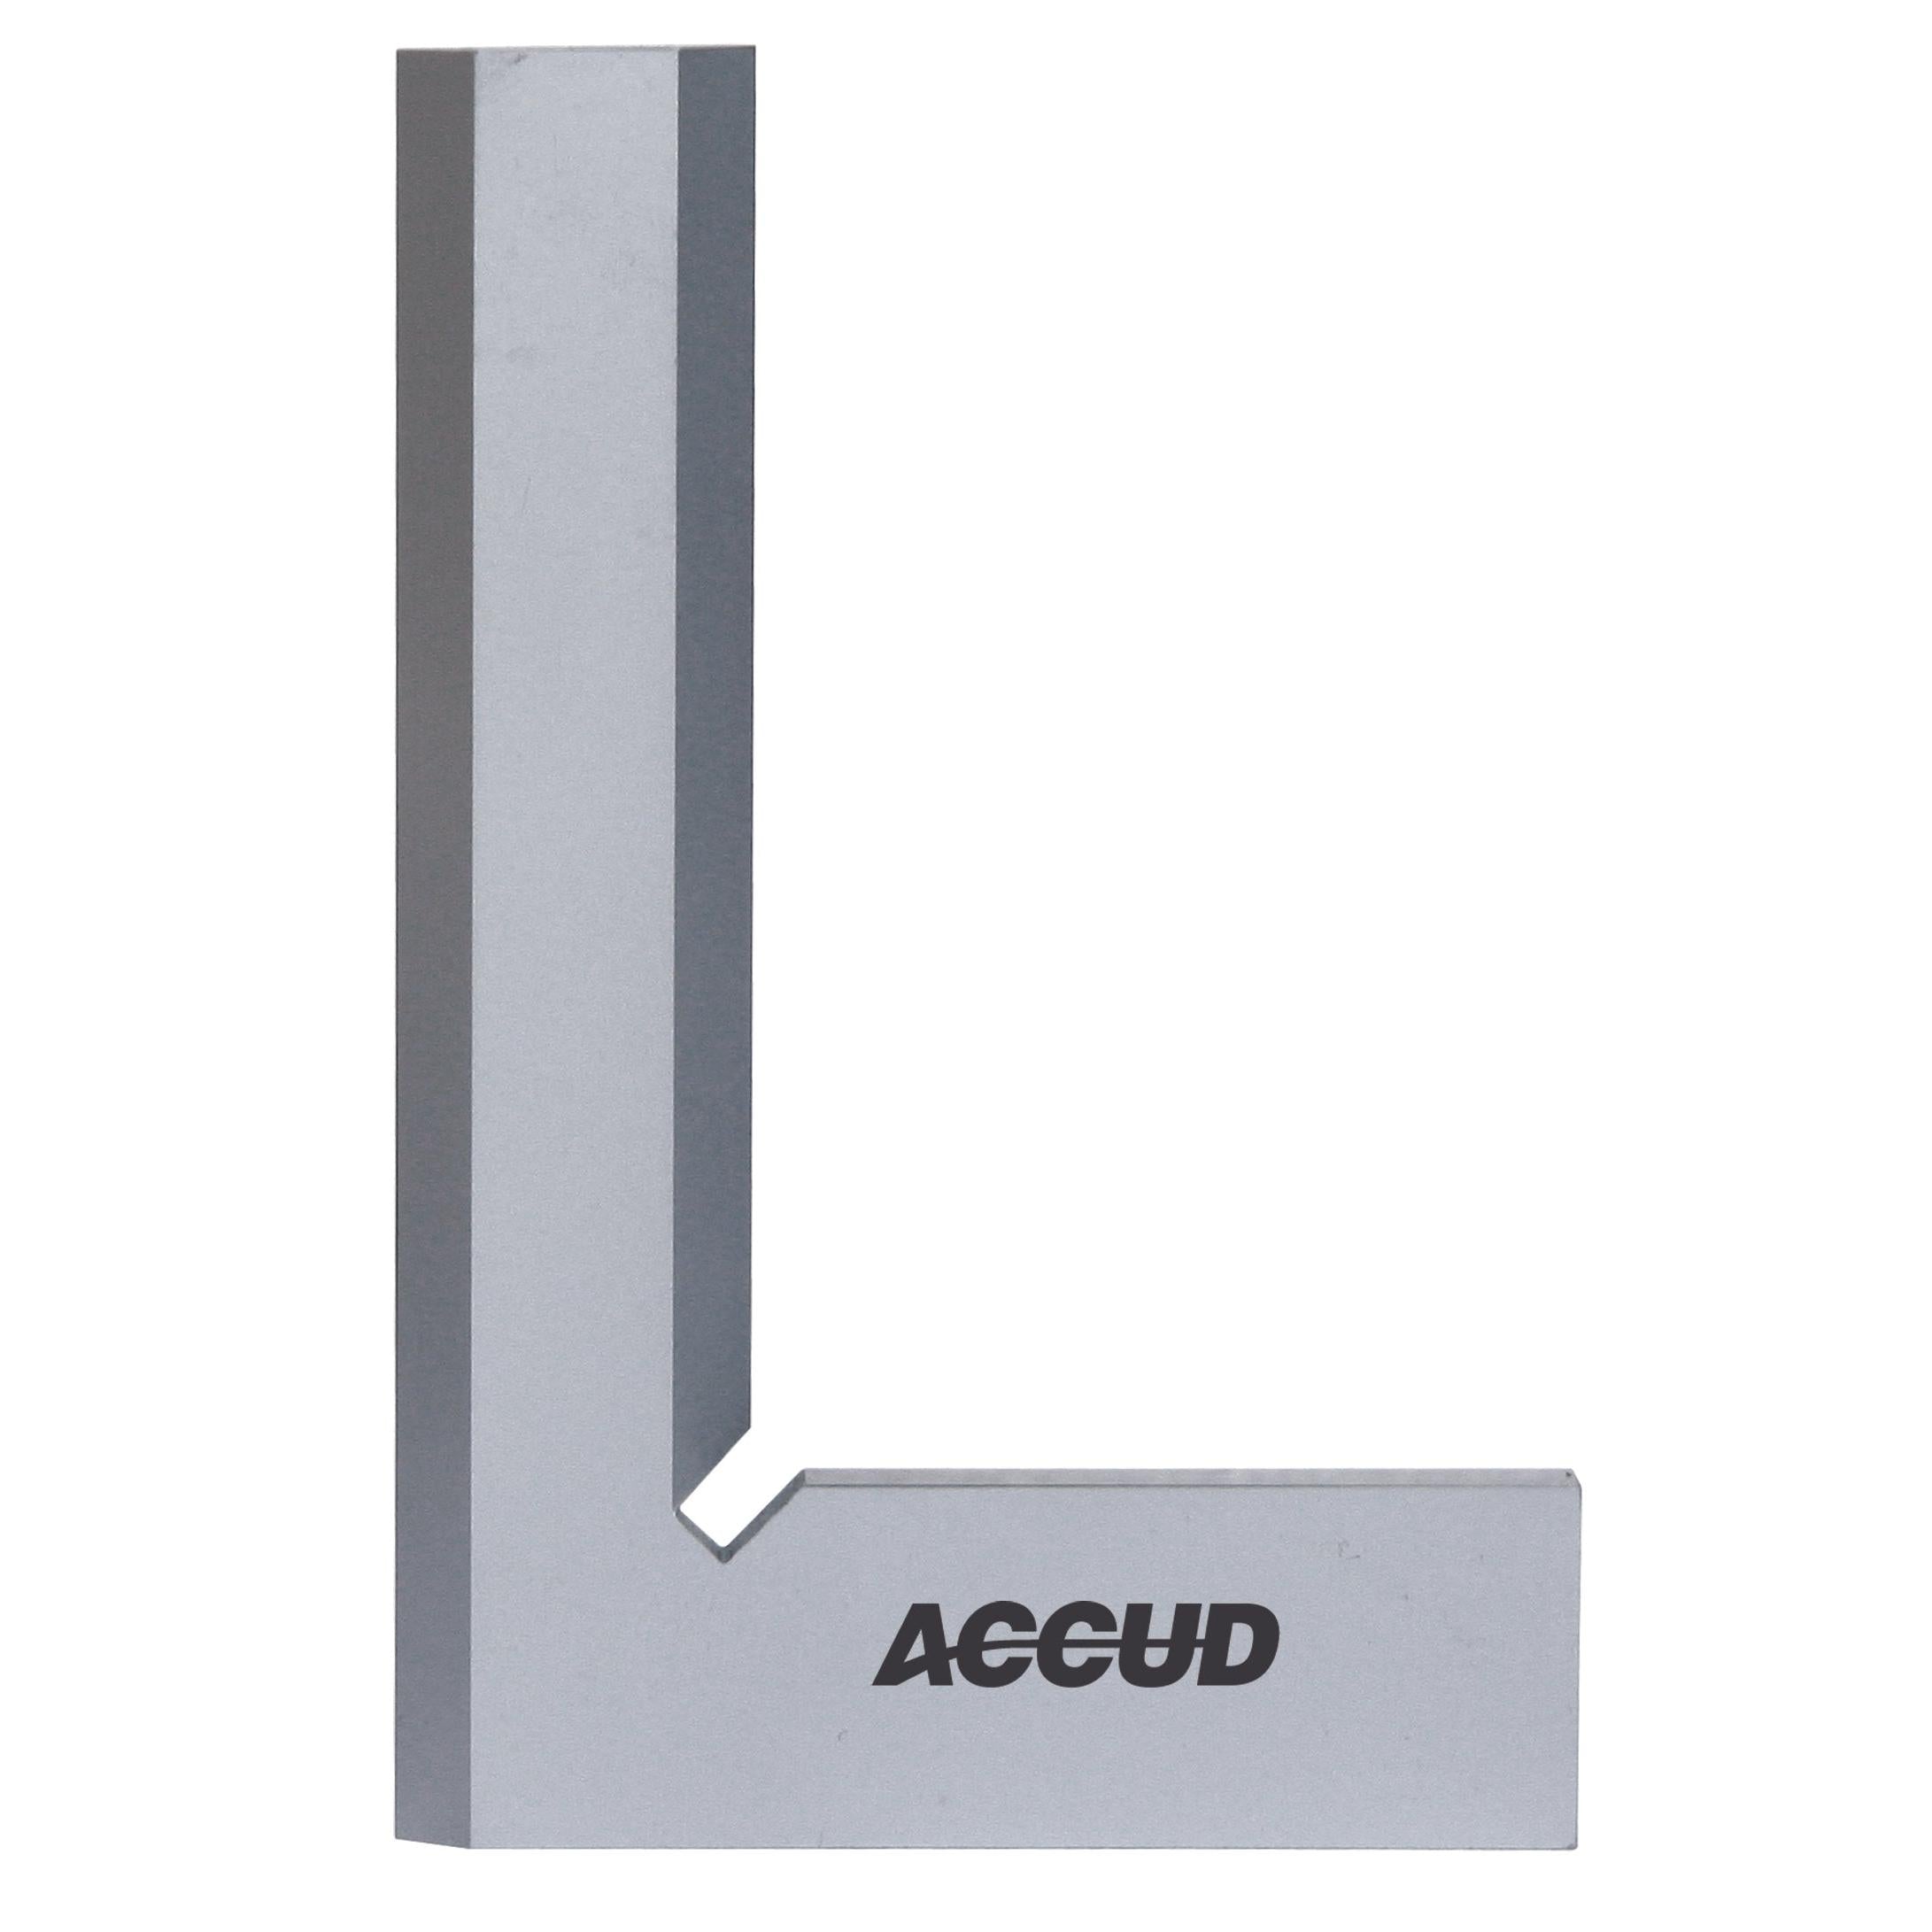 ACCUD | Beveled Edge Square 75X50Mm | 832-003-00 Power Tool Services